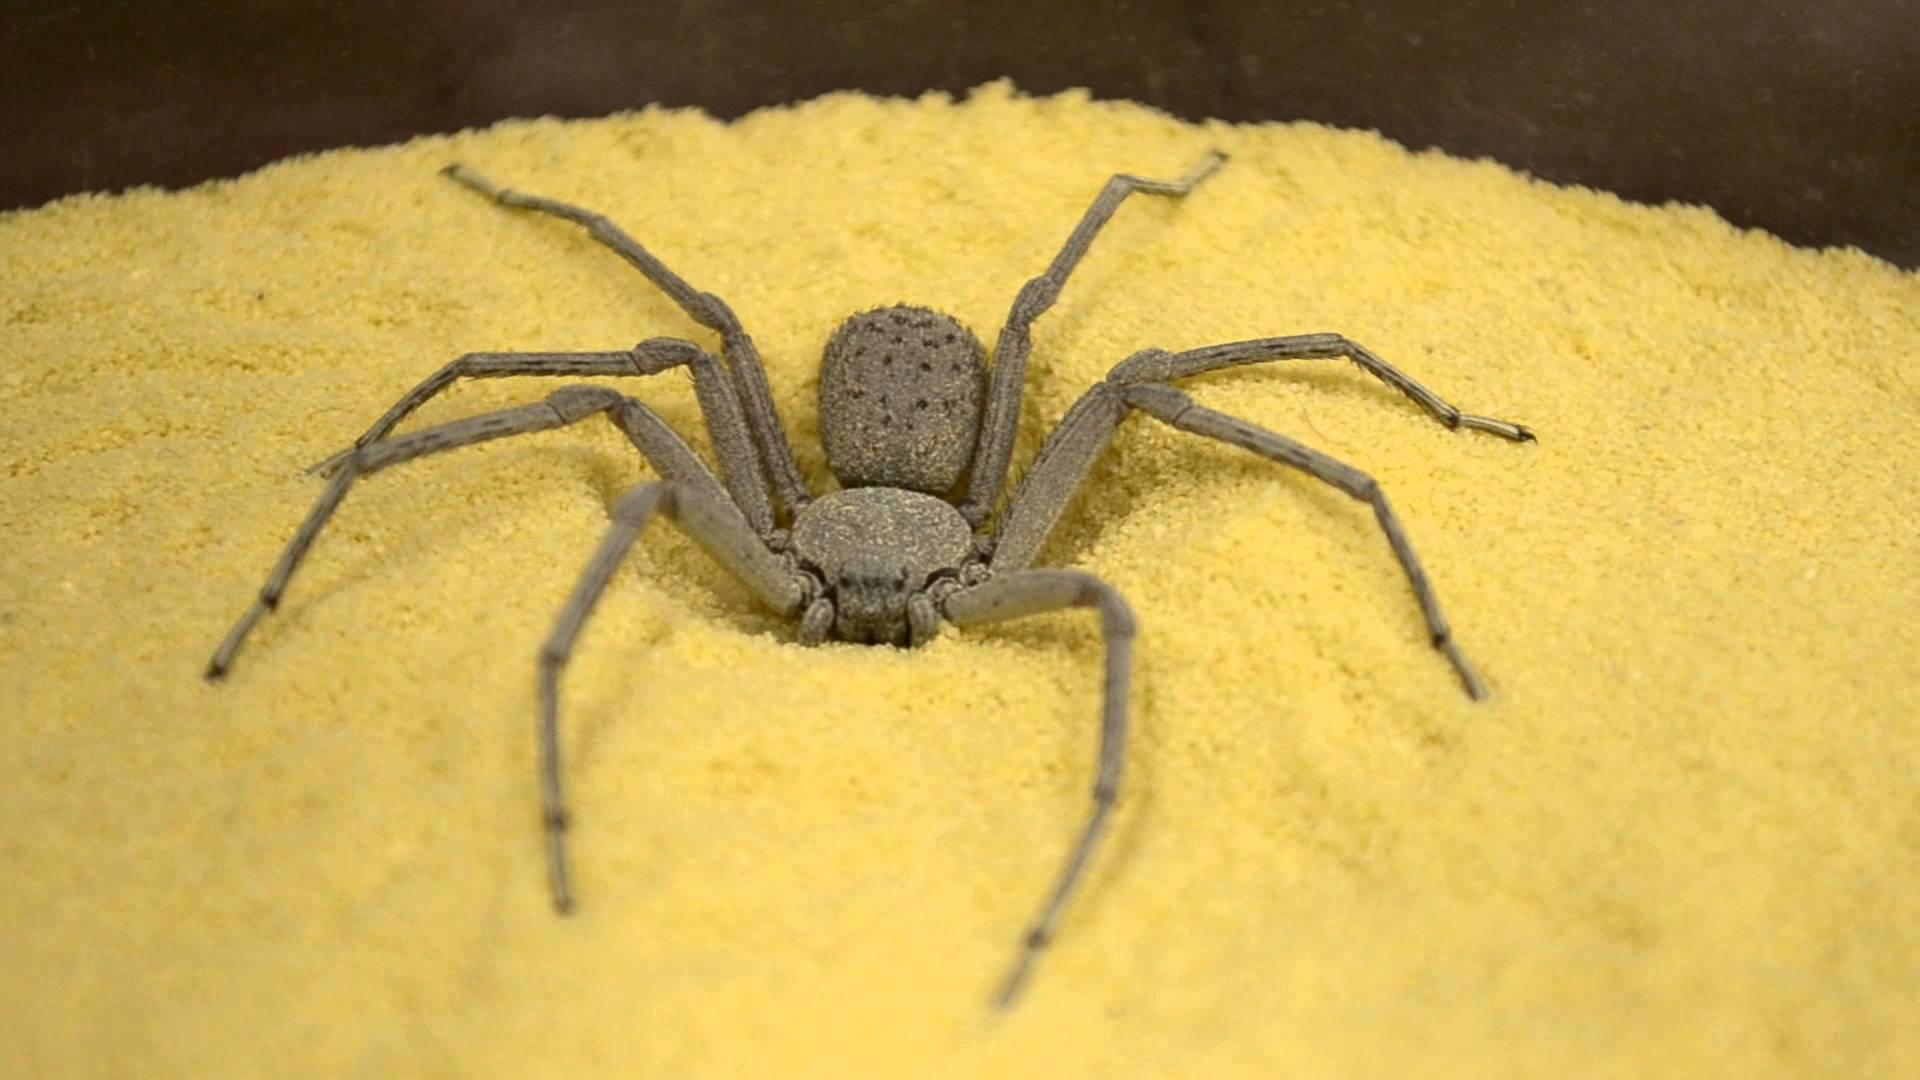 The Six-Eyed Sand Spider